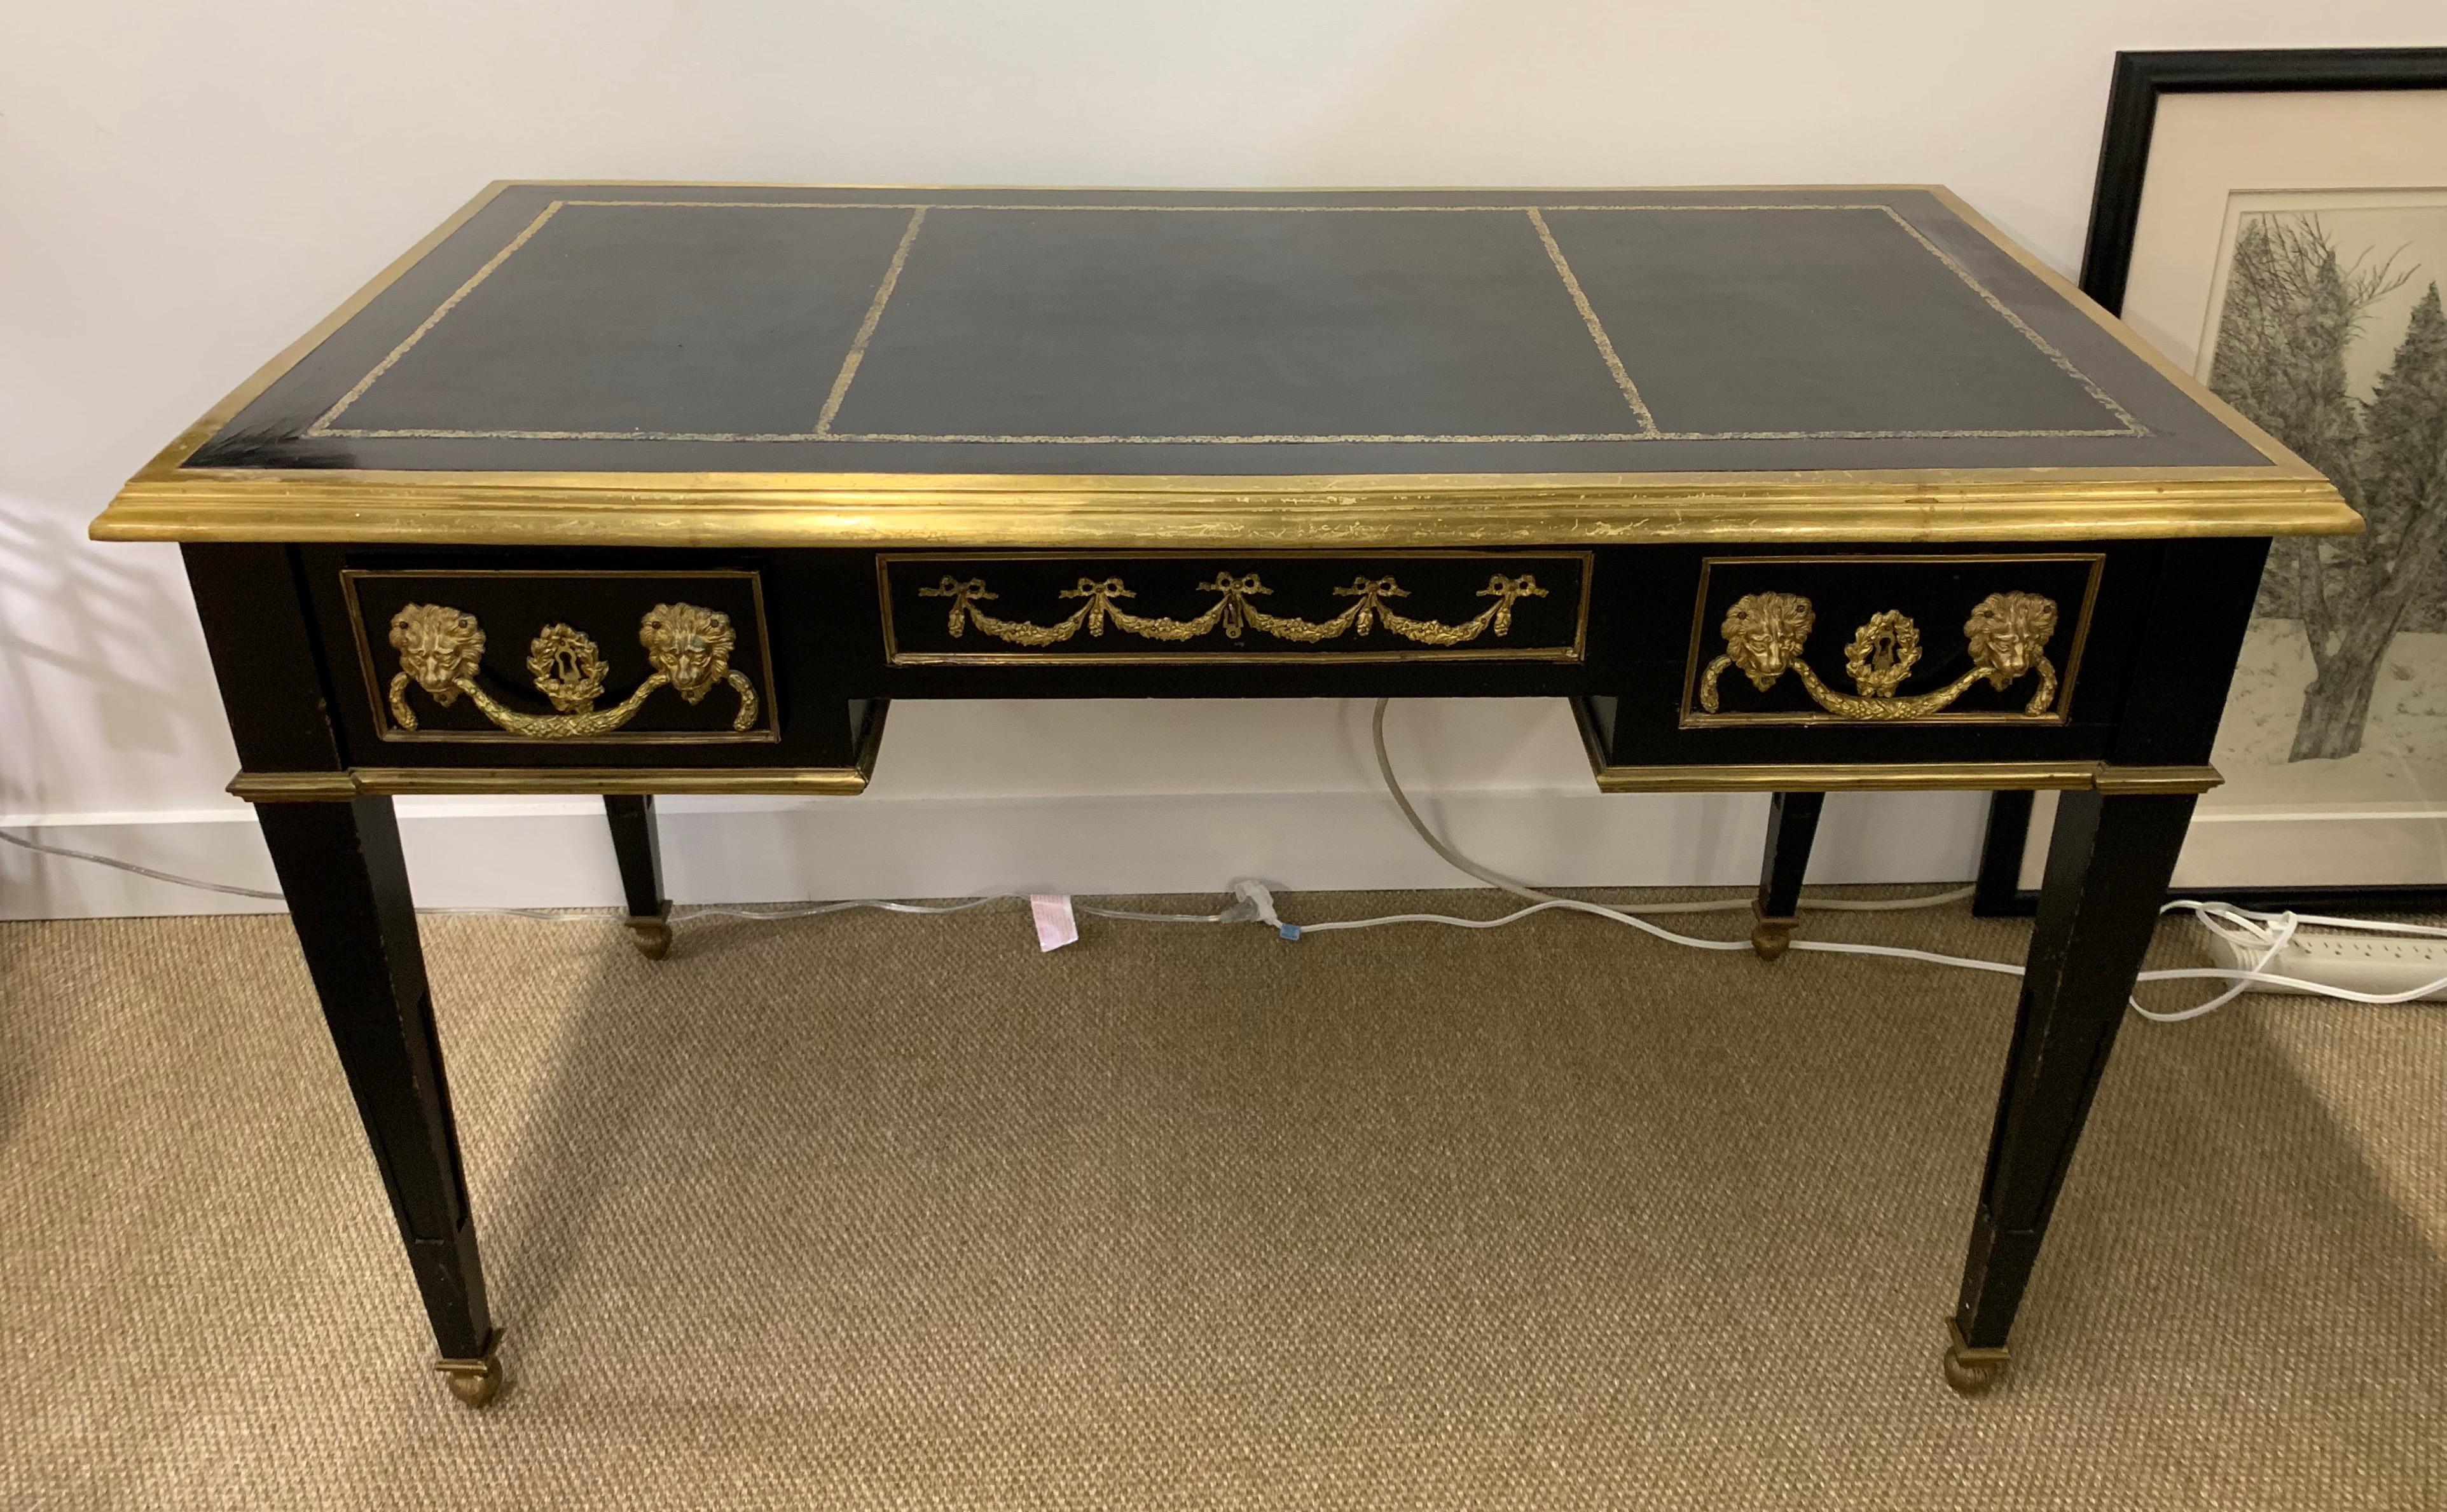 Jansen style French Louis XVI ebony desk with beautifully detailed heavy bronze mounts with a tooled black leather top. It has a heavy bronze border running around the entire desk and rests on tapered legs. There are three dovetailed drawers